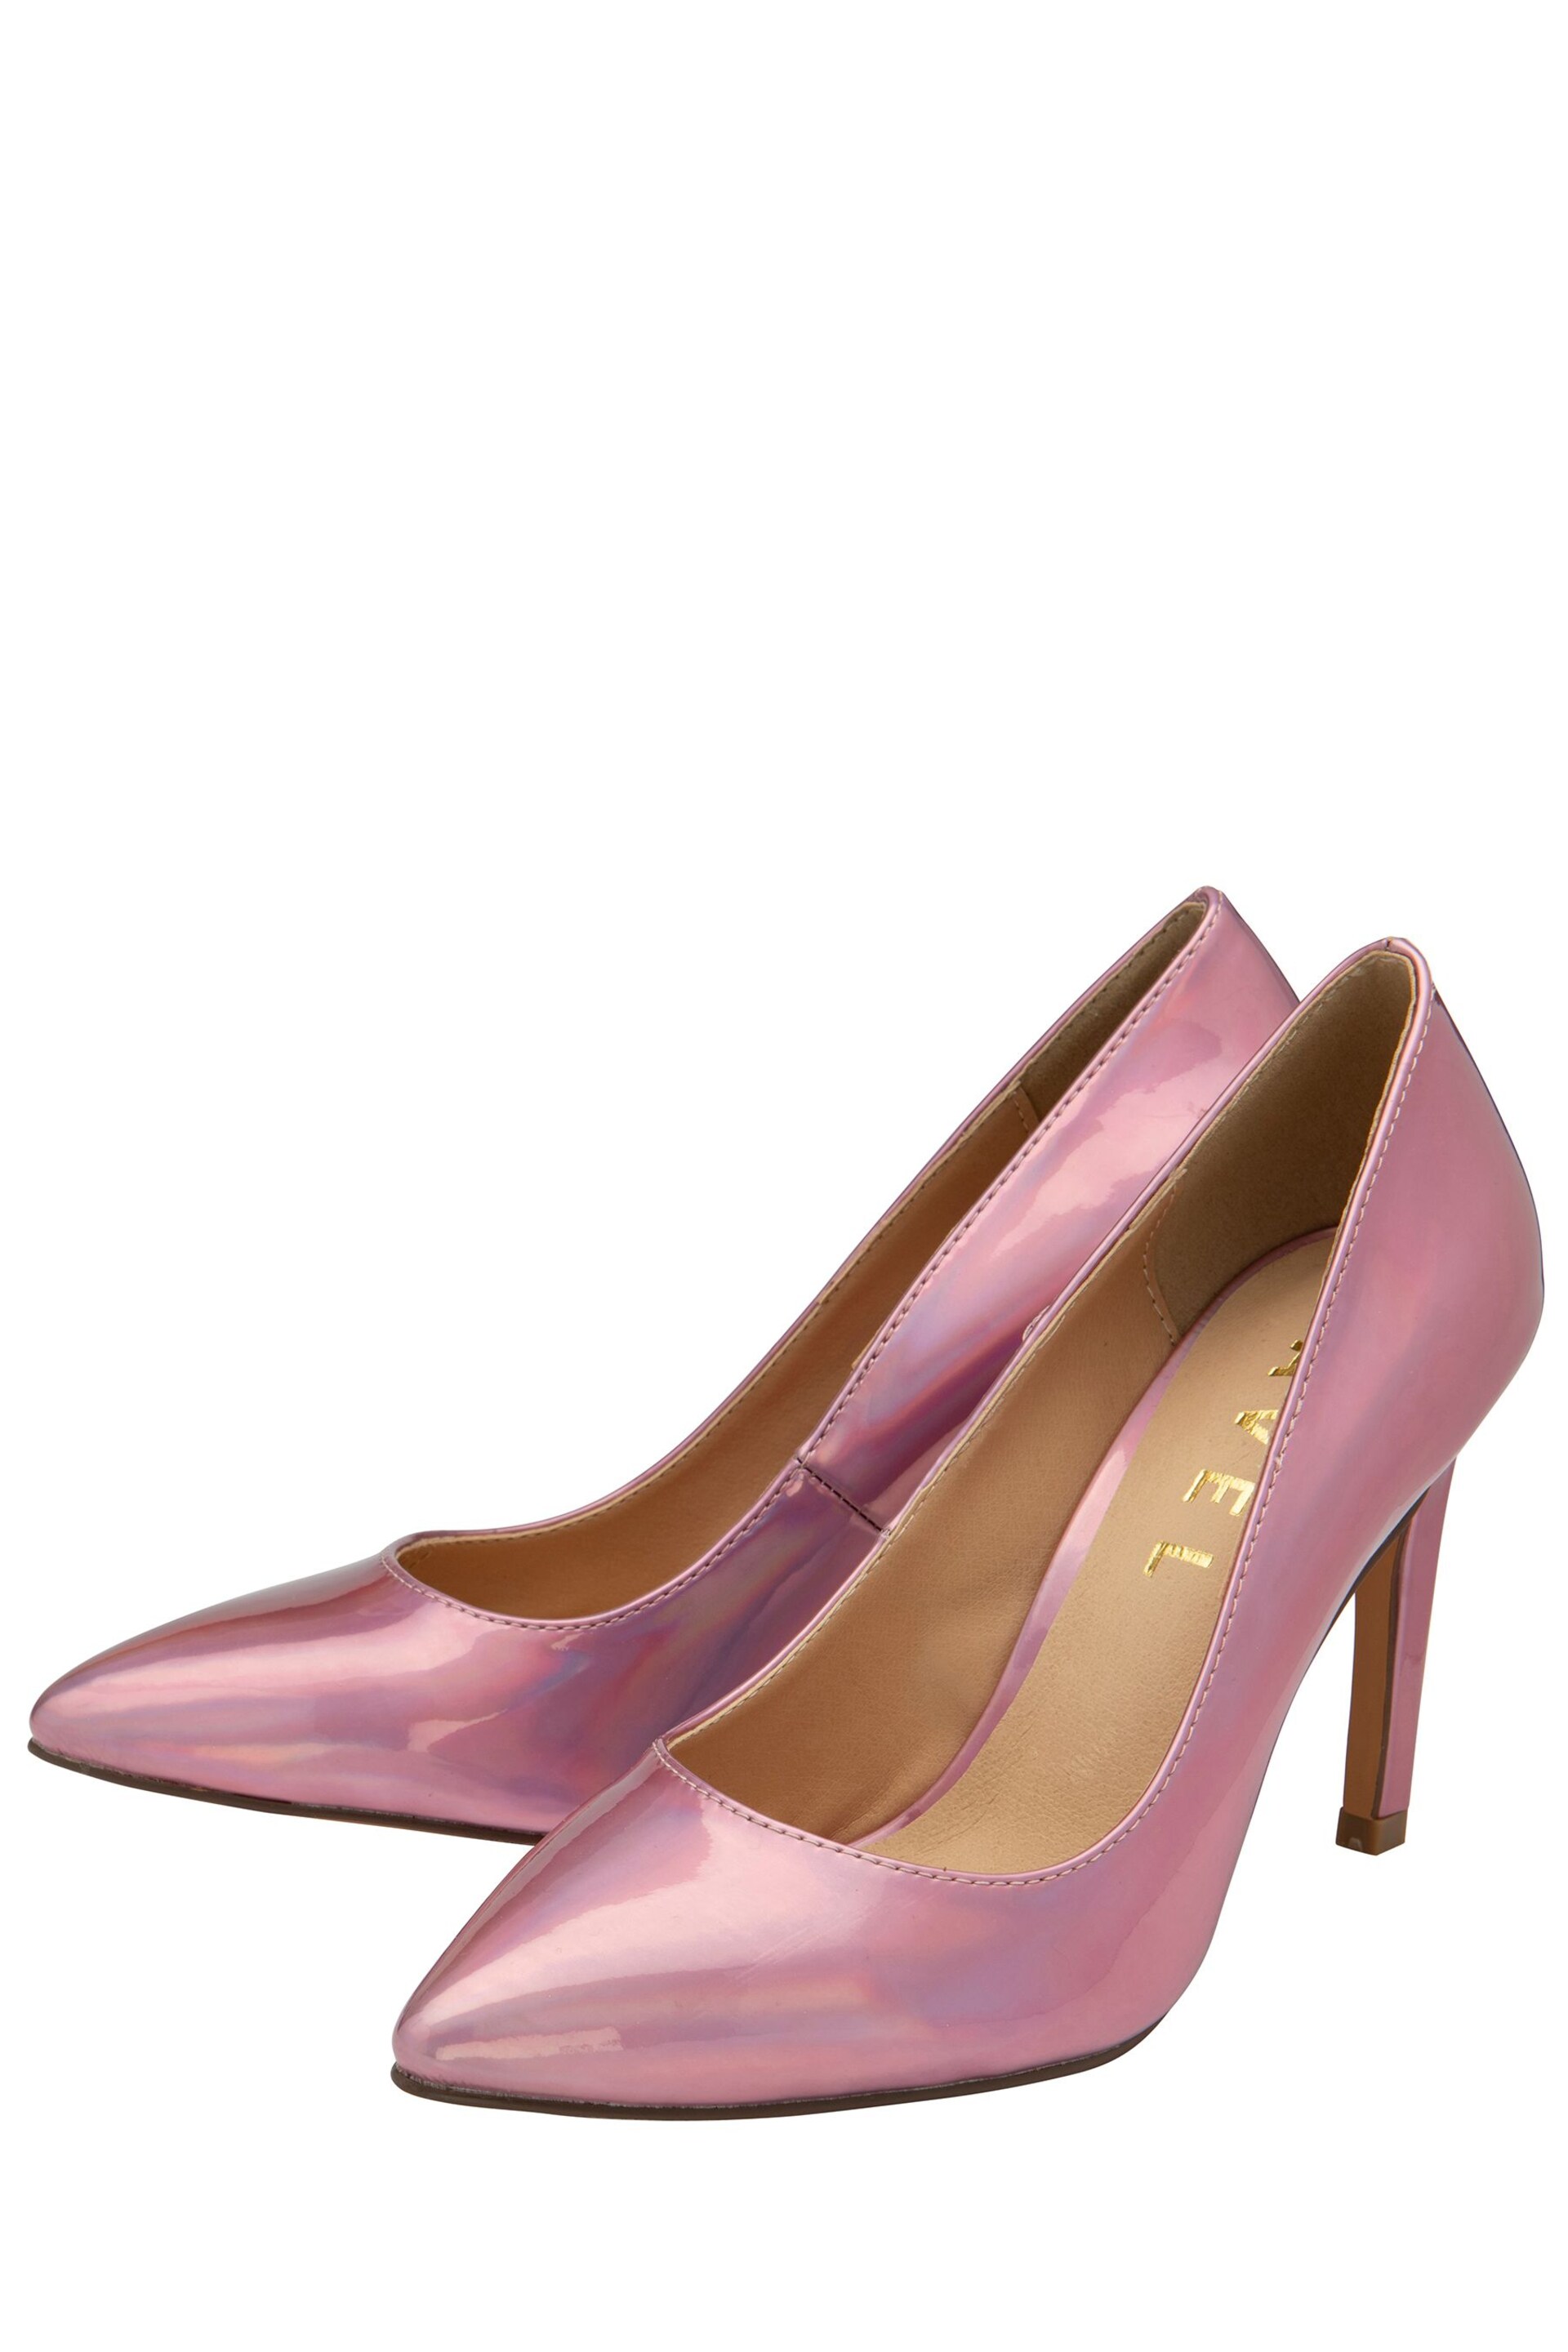 Ravel Pink Stiletto Heel Court Shoes - Image 2 of 4